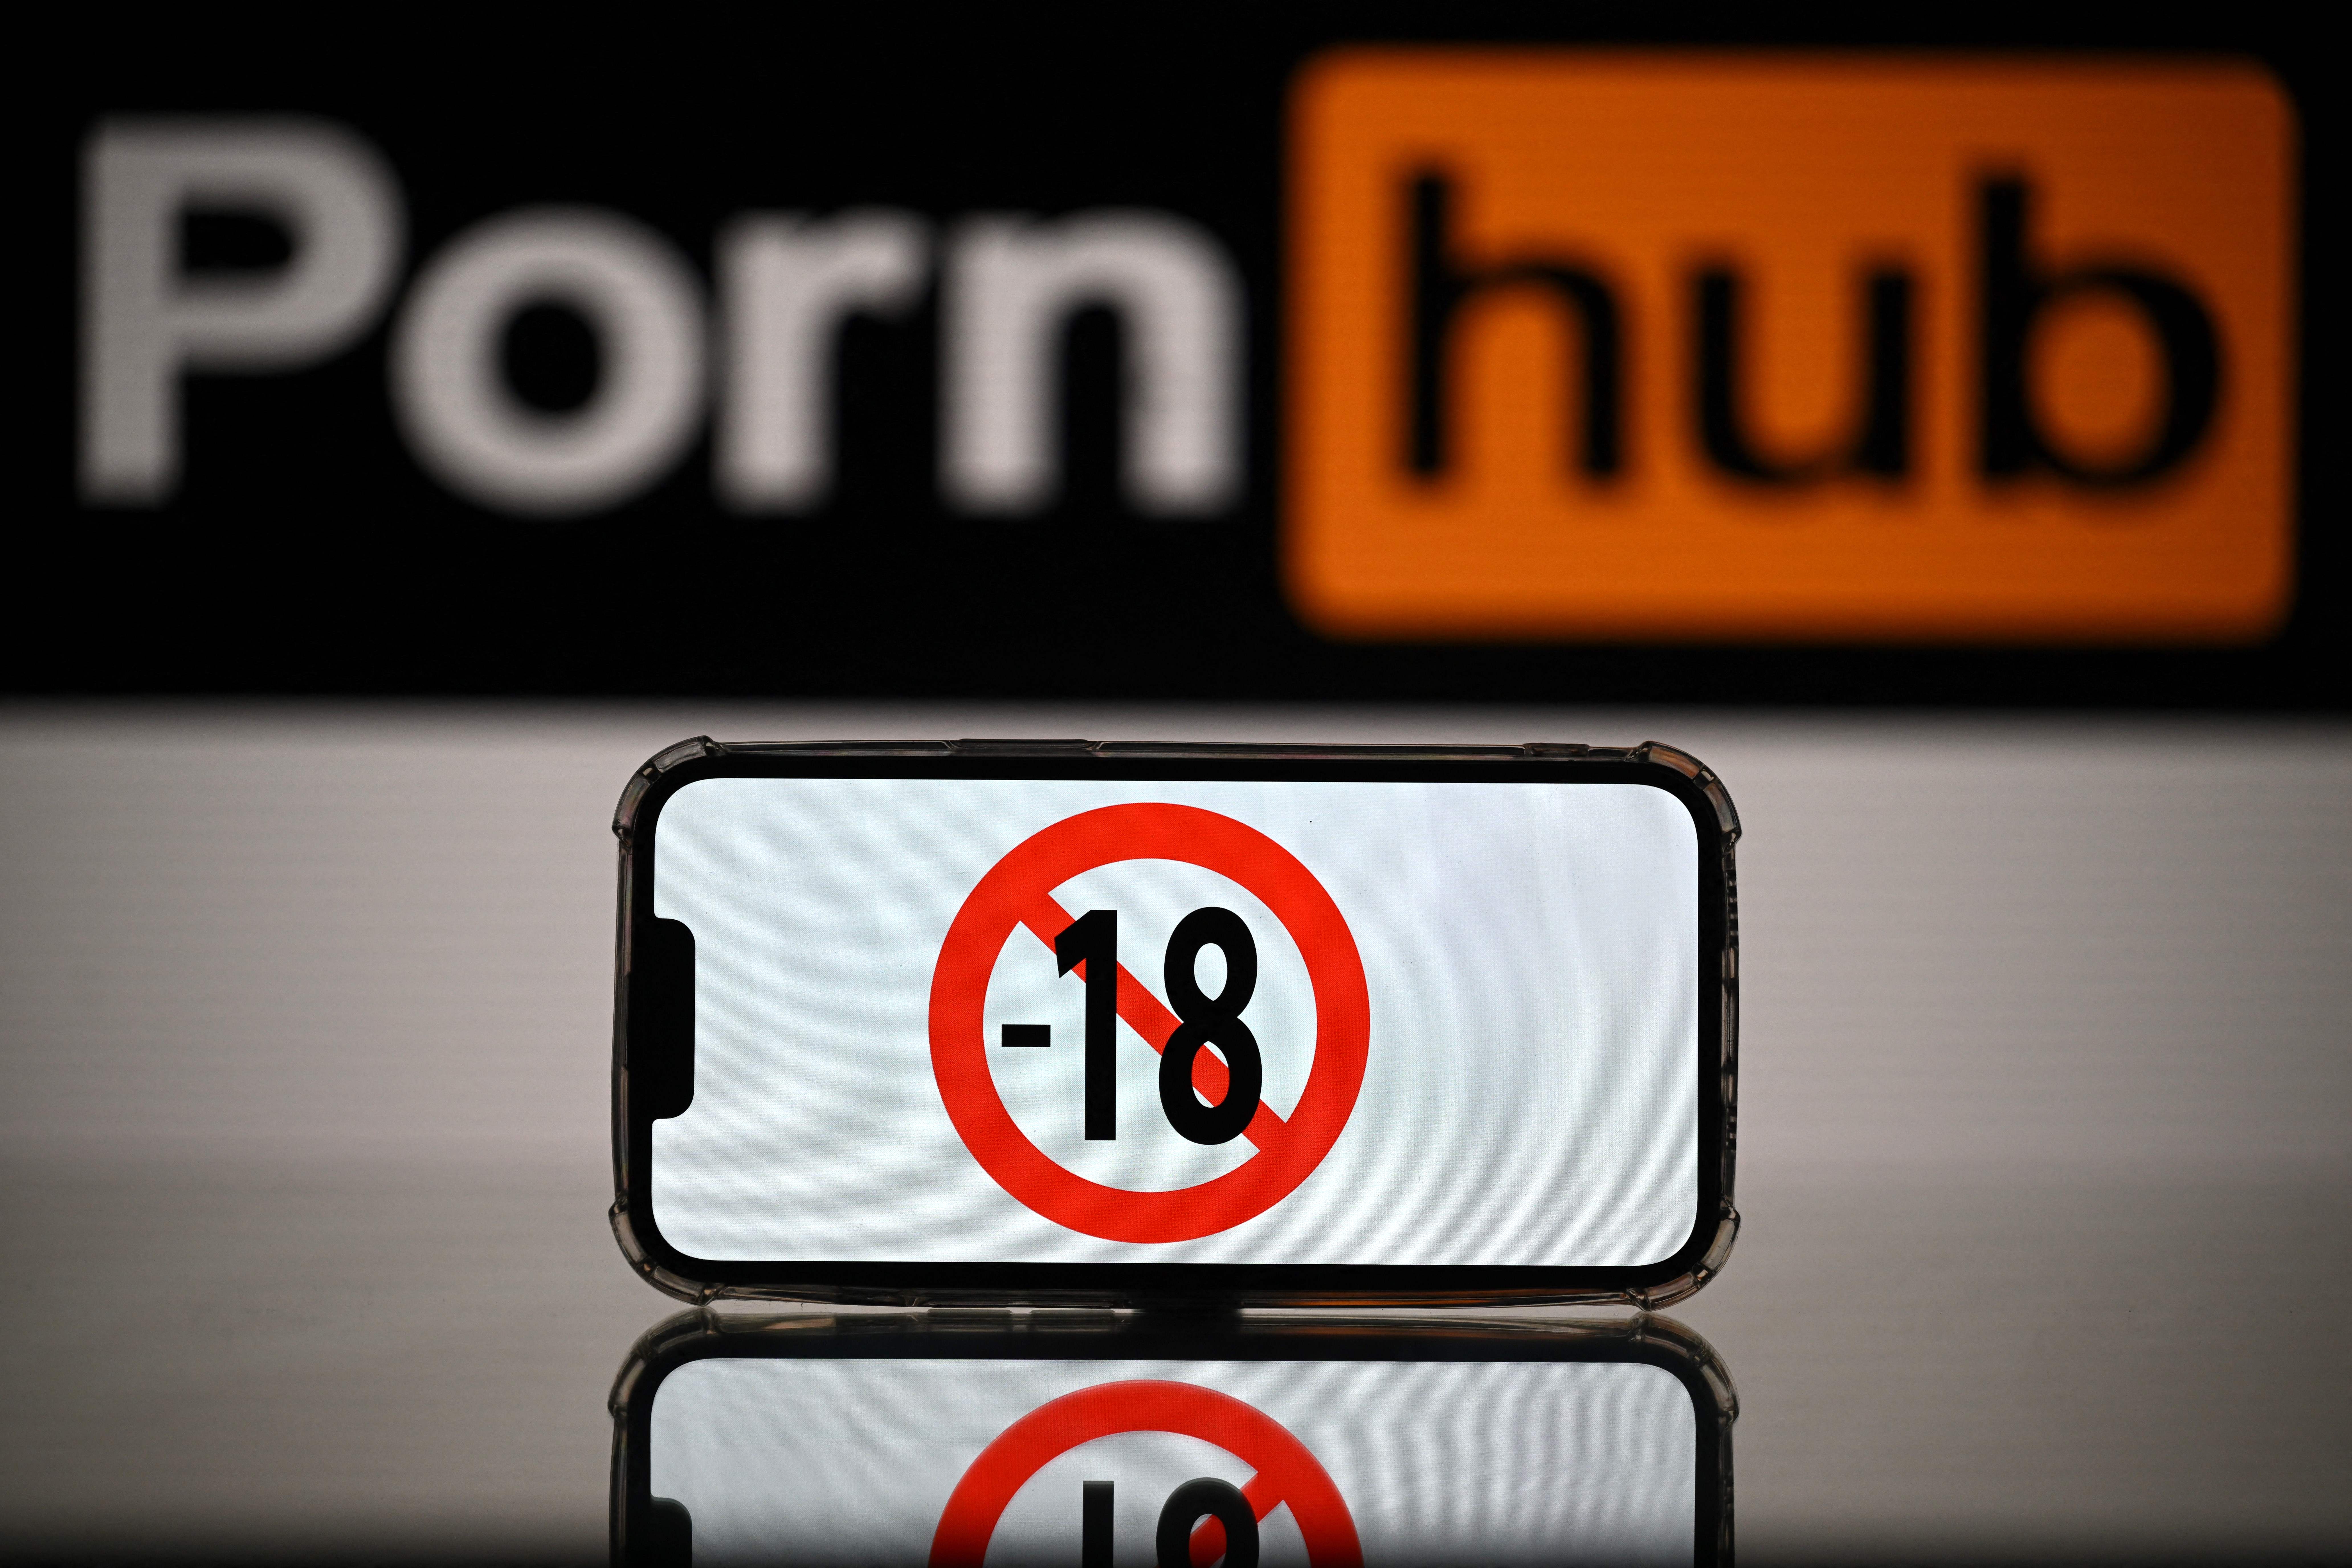 Pirnhub - Louisiana law requiring proof of ID for porn site access has privacy  advocates worried - Marketplace